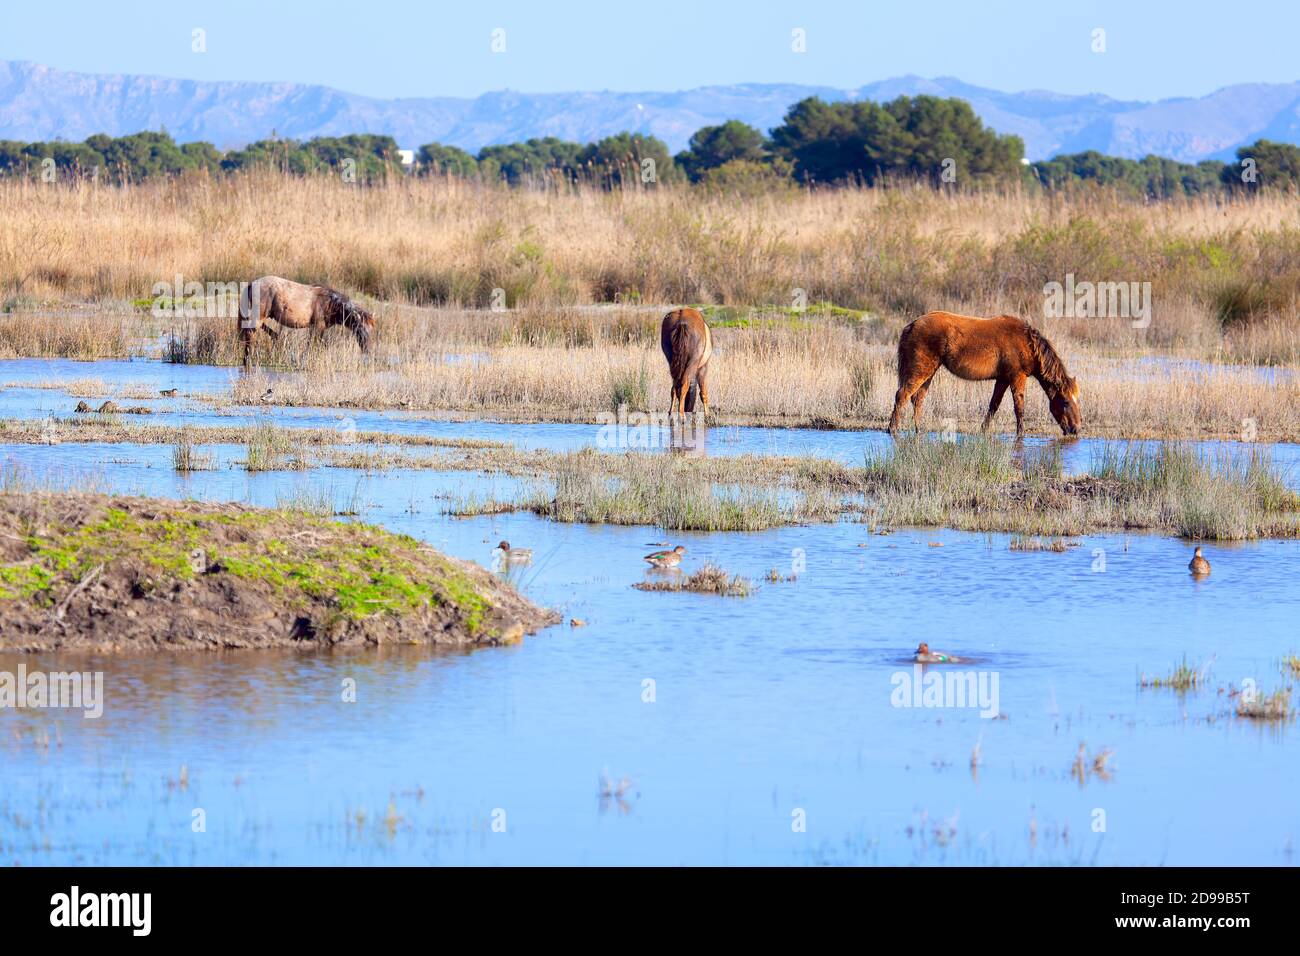 Wild horses on the natural lands , Swampy terrain with mustangs Stock Photo